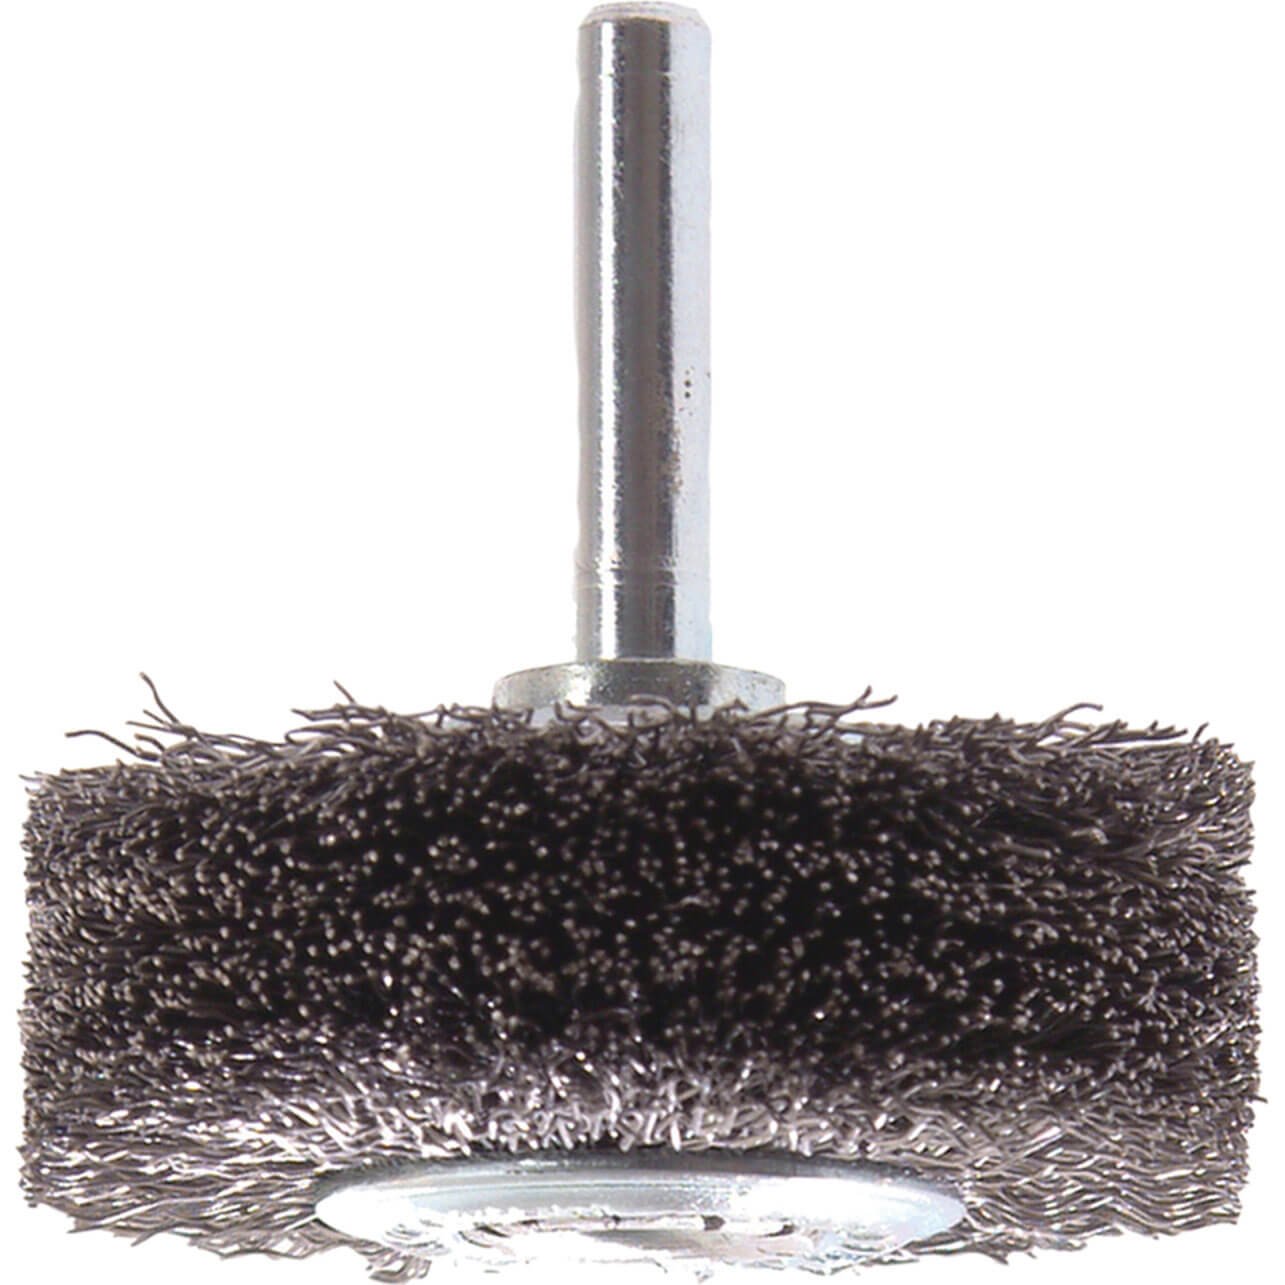 Image of Lessmann Crimped Wire Wheel Brush 70mm 6mm Shank